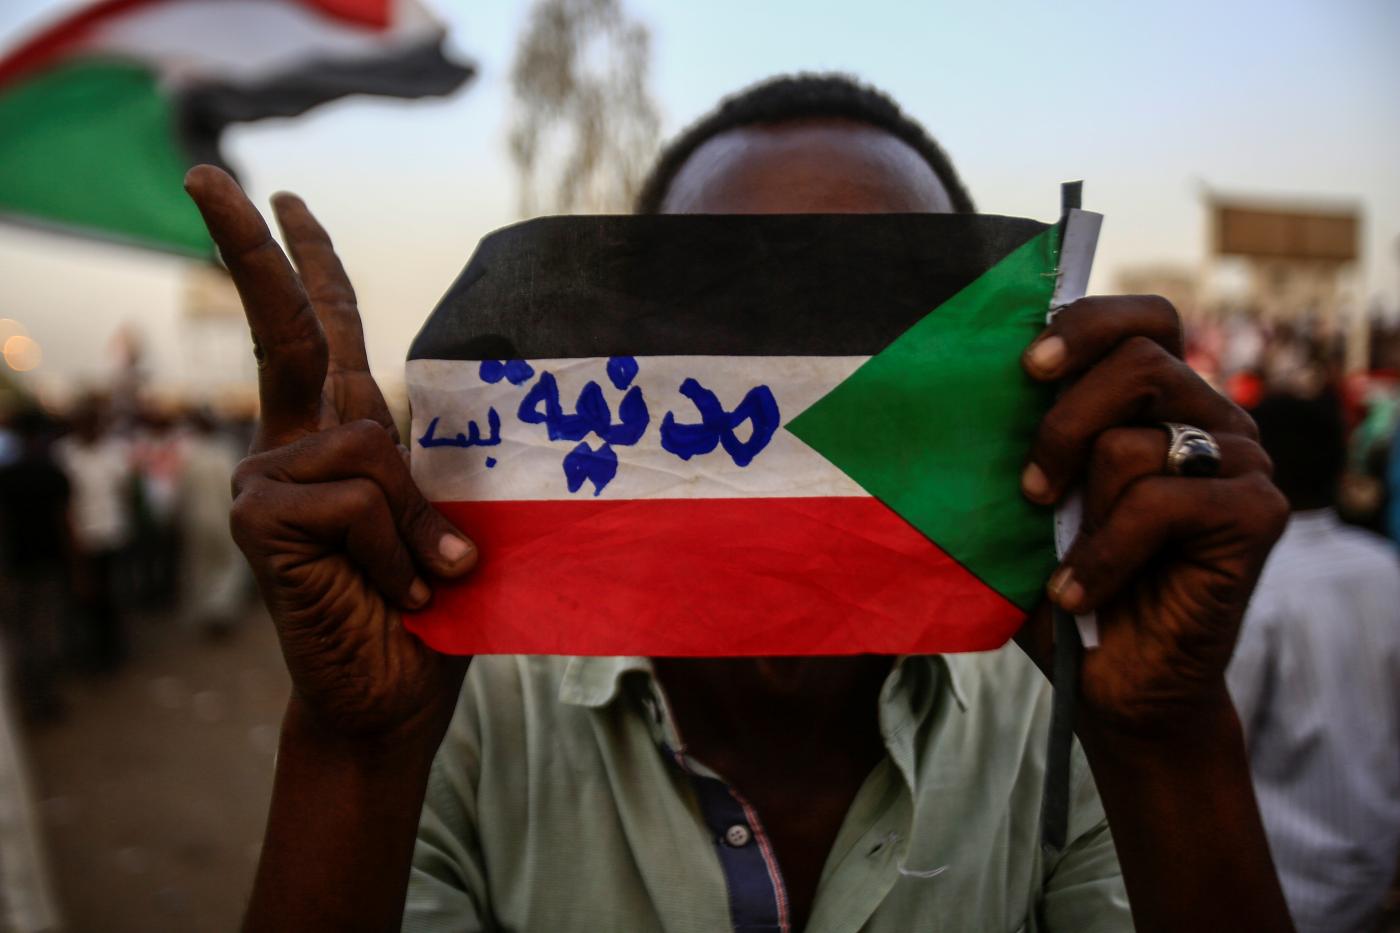 A Sudanese protester holds the national flag with writings reading in Arabic "Civilian Only" during a rally outside the army headquarters in Khartoum on 2 May 2019. AFP.